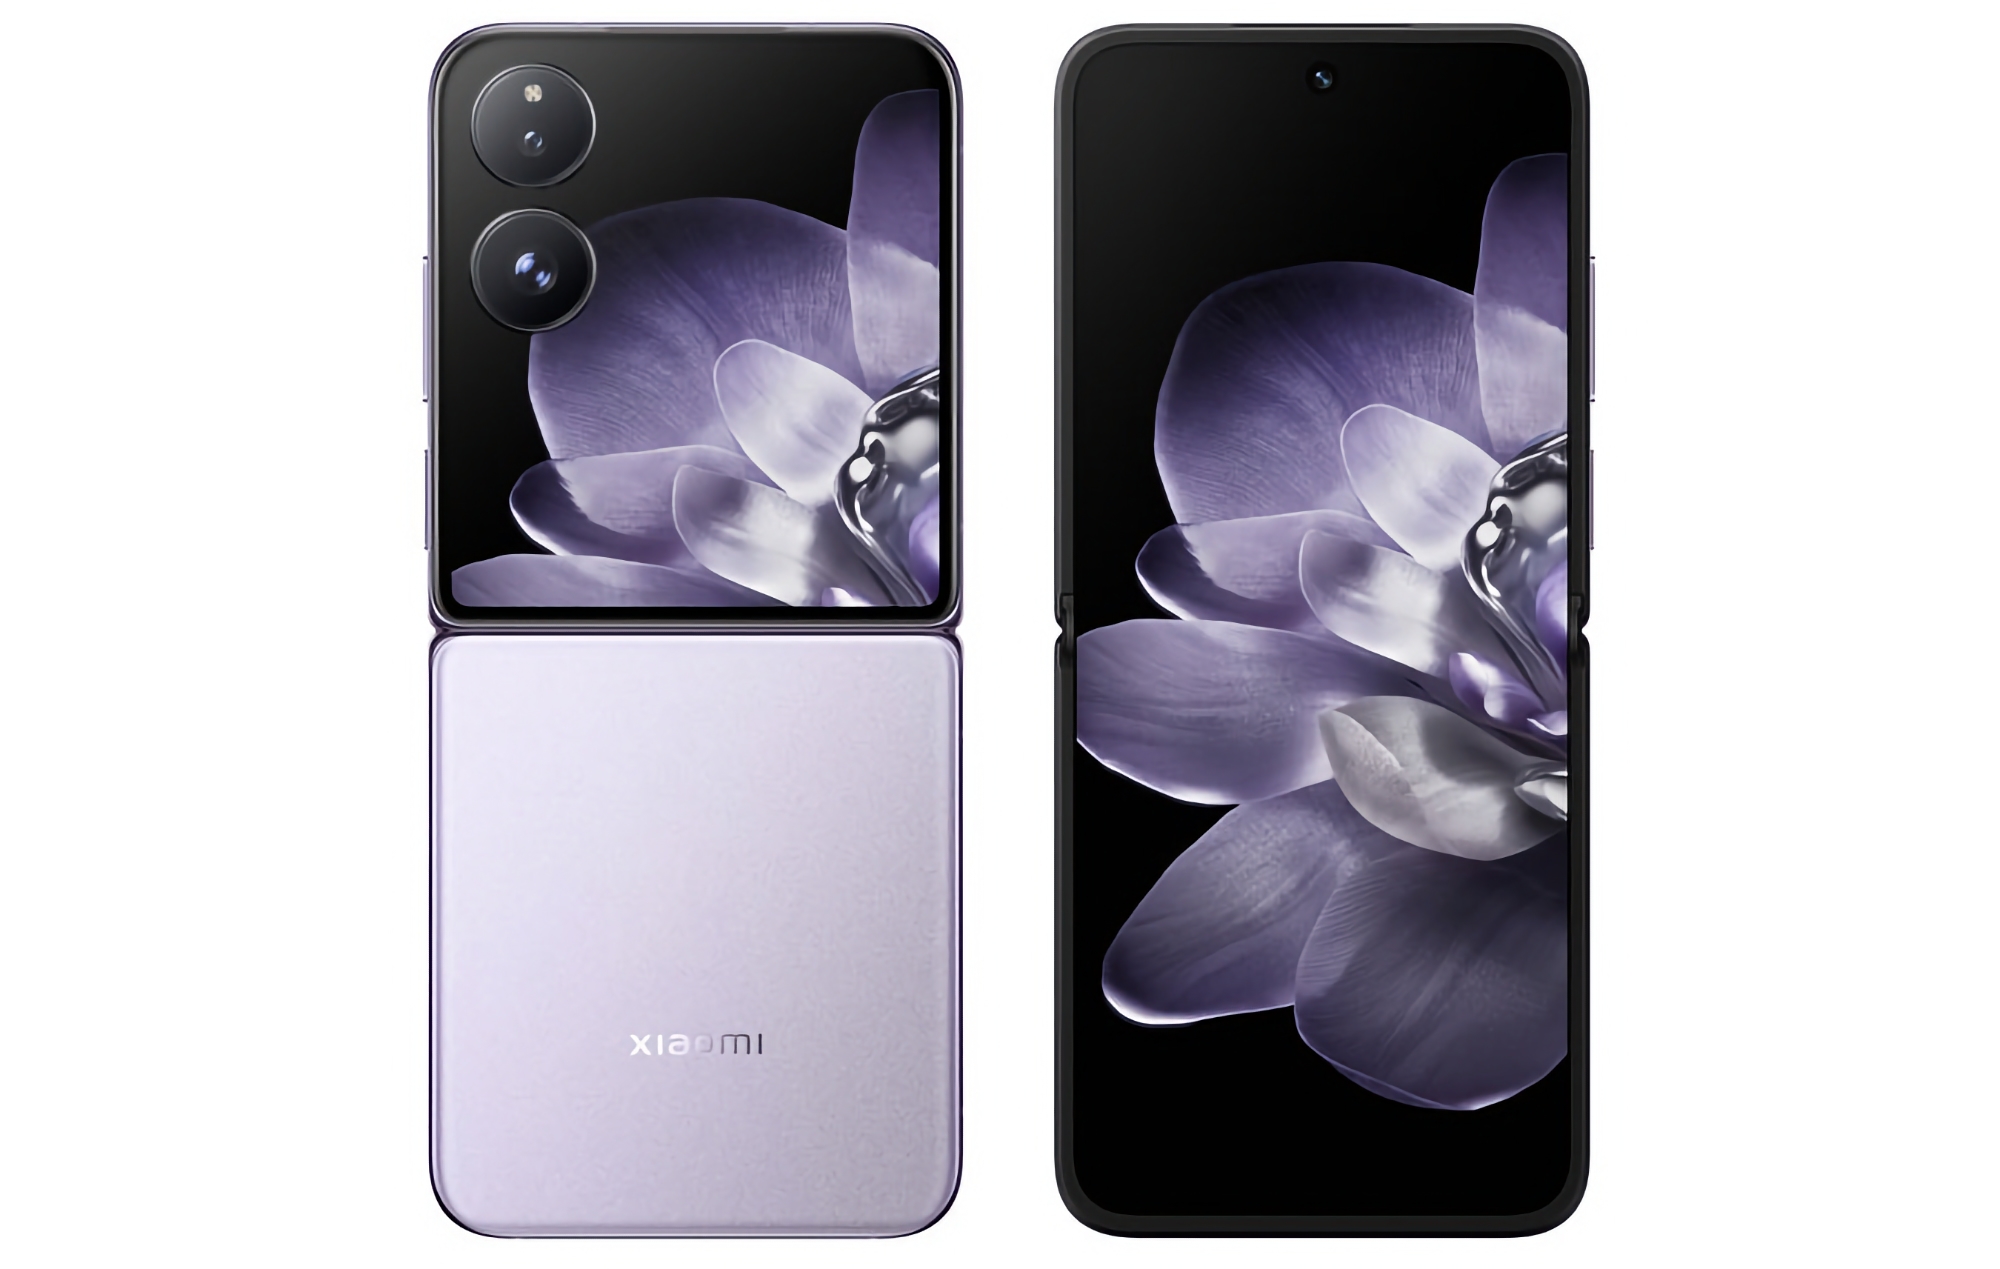 Xiaomi MIX Flip will soon debut in Europe with a price tag of €1,300